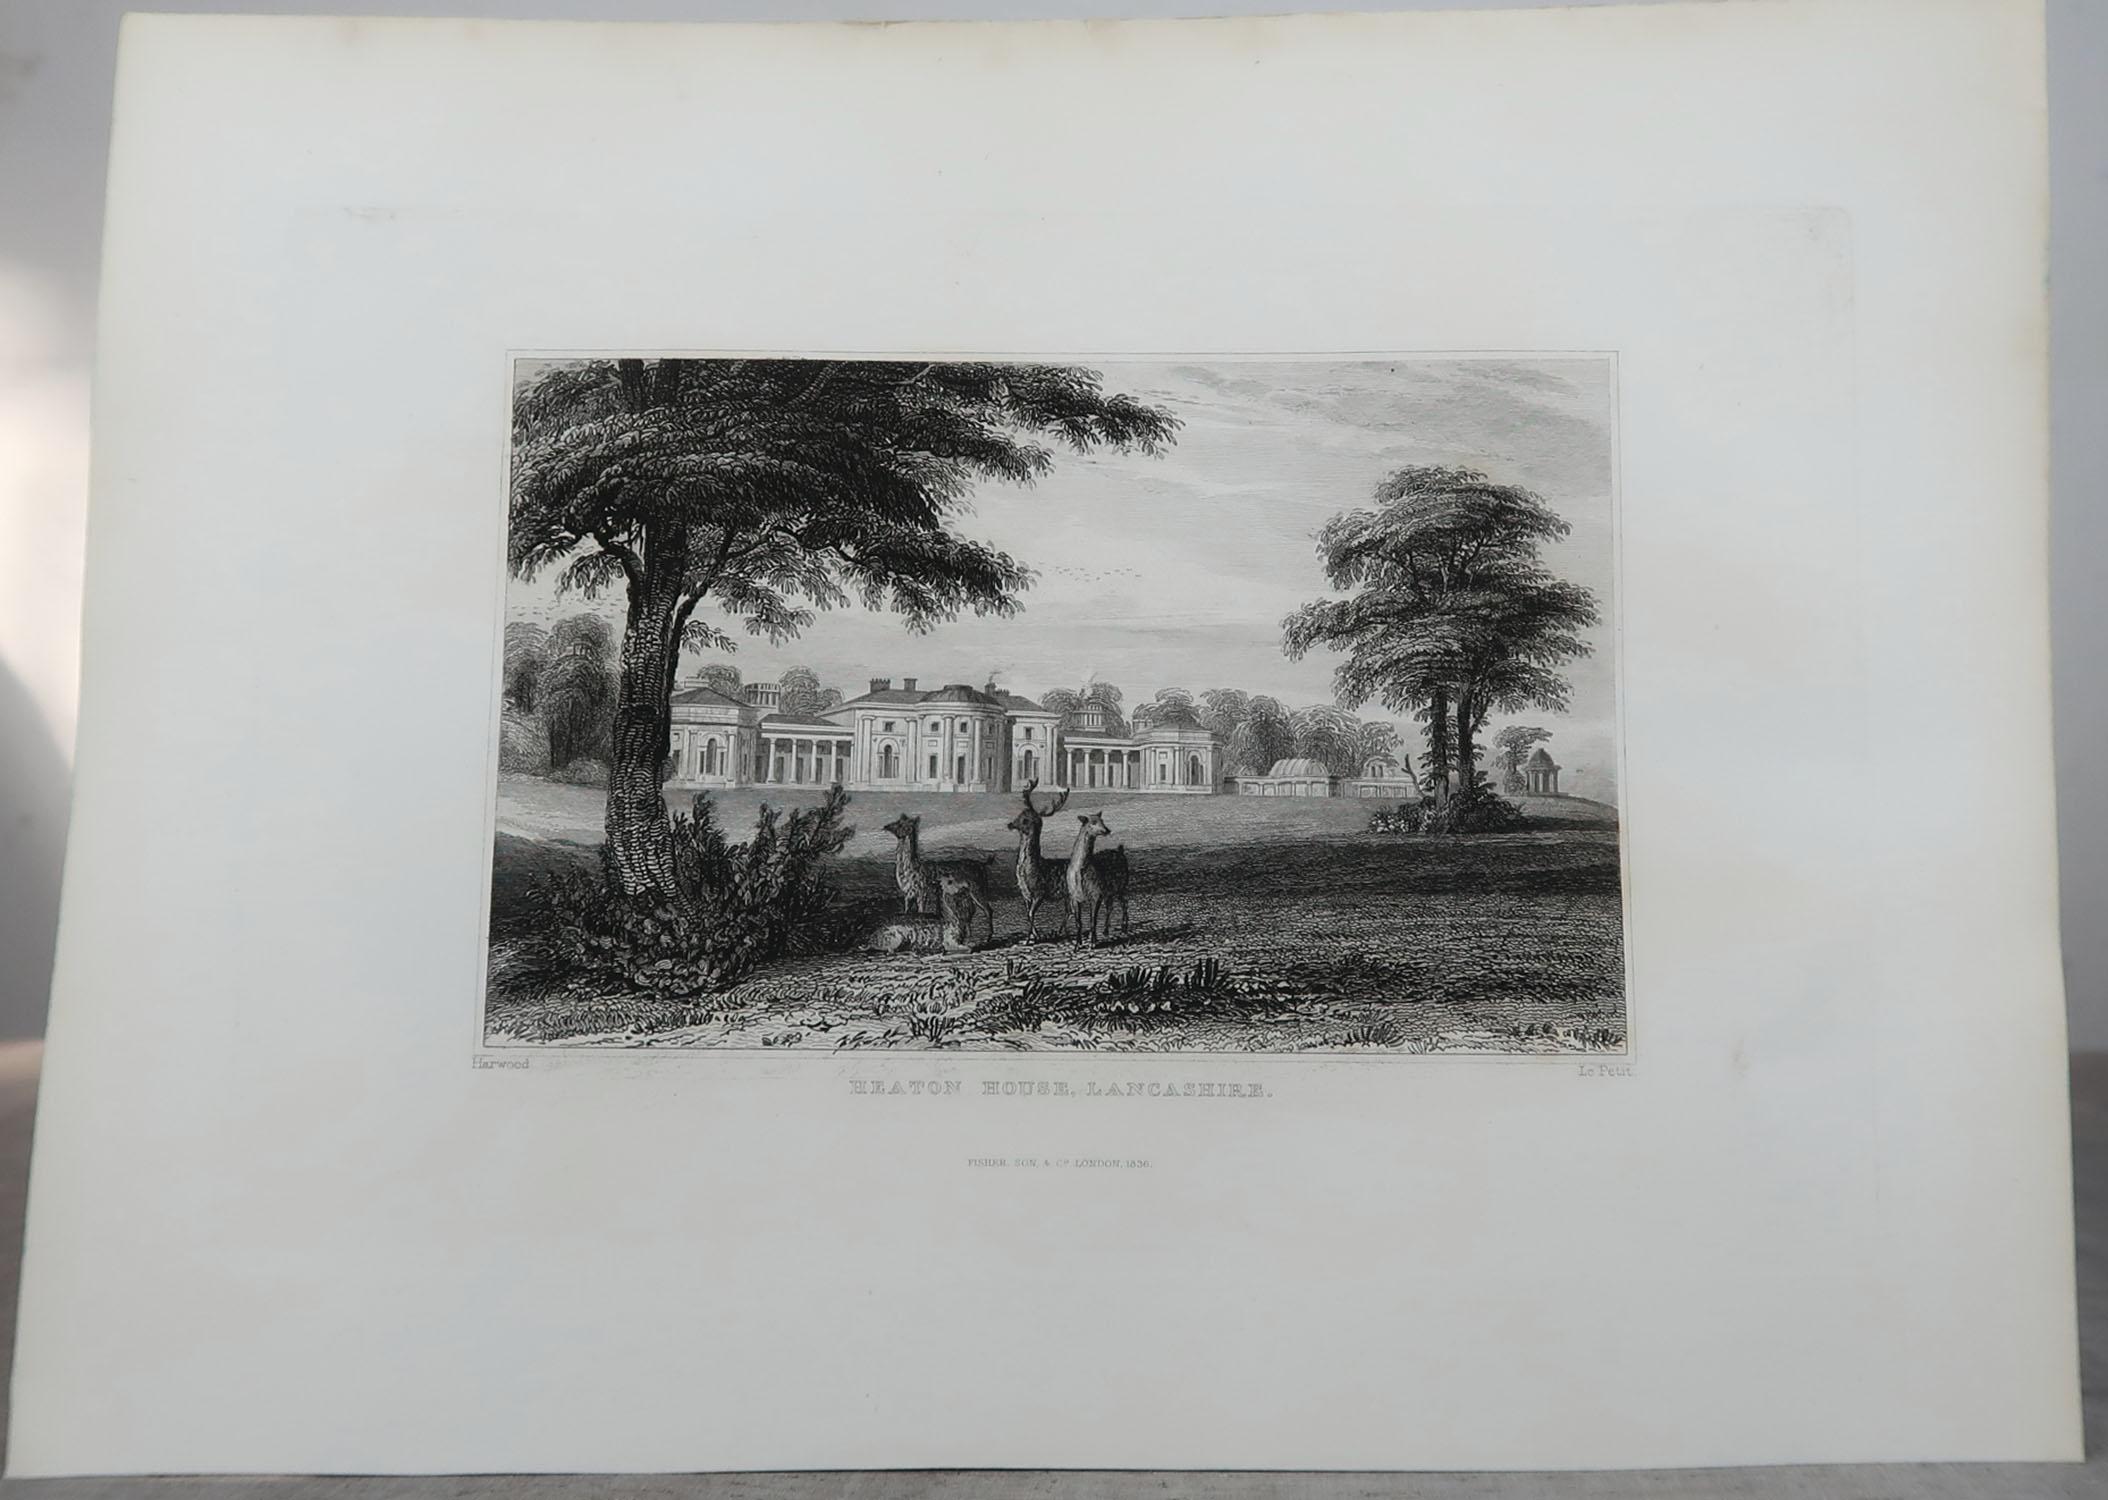 Glorious set of 18 architectural prints of English country houses or stalely homes.

Fine steel engravings.

Published by Fisher.

Most of them have dates on, 1831-1836

Unframed.

The measurement given is the paper size of one